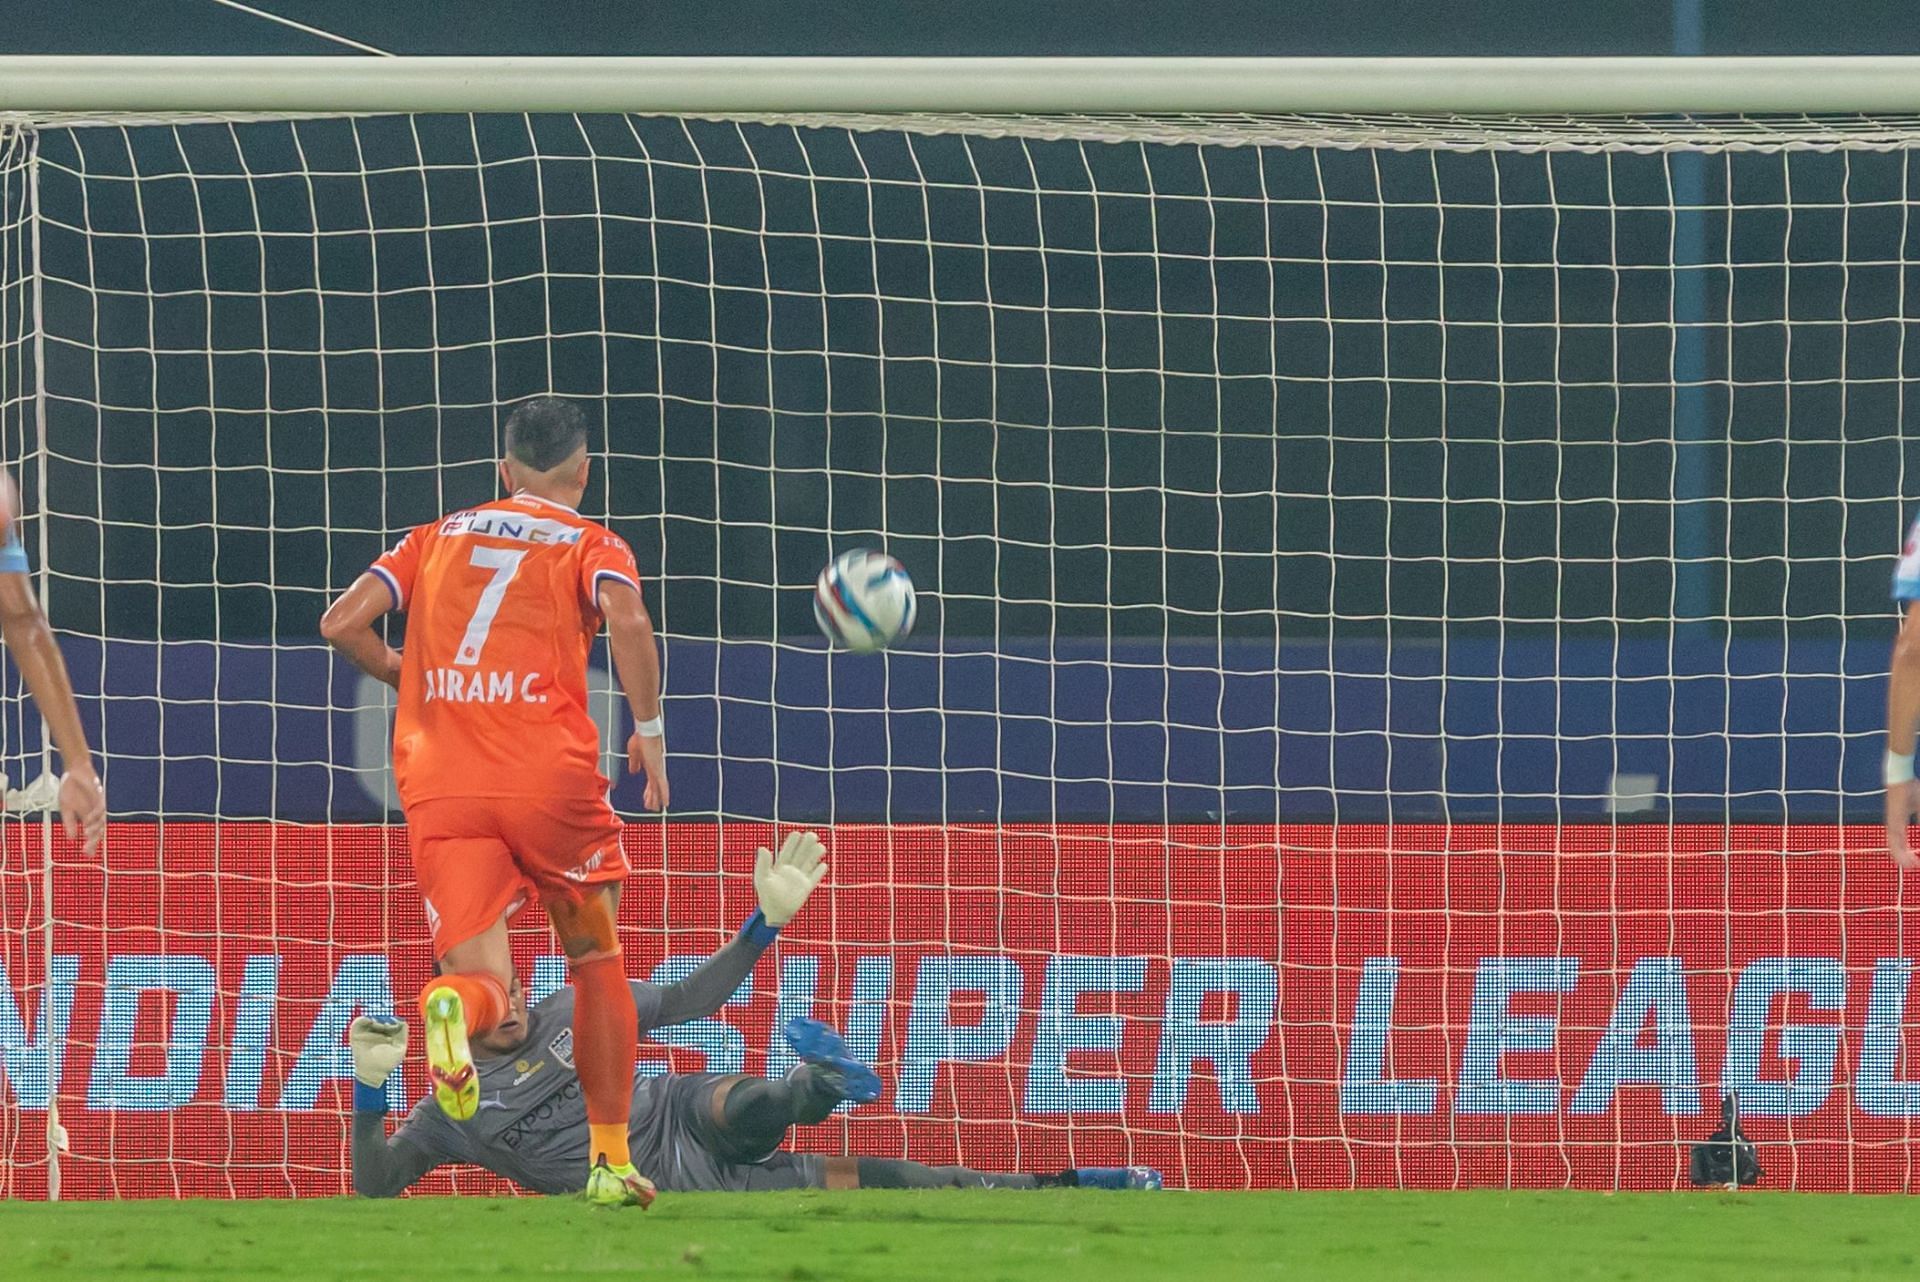 Airam missed a penalty today (Image courtesy: ISL Media)